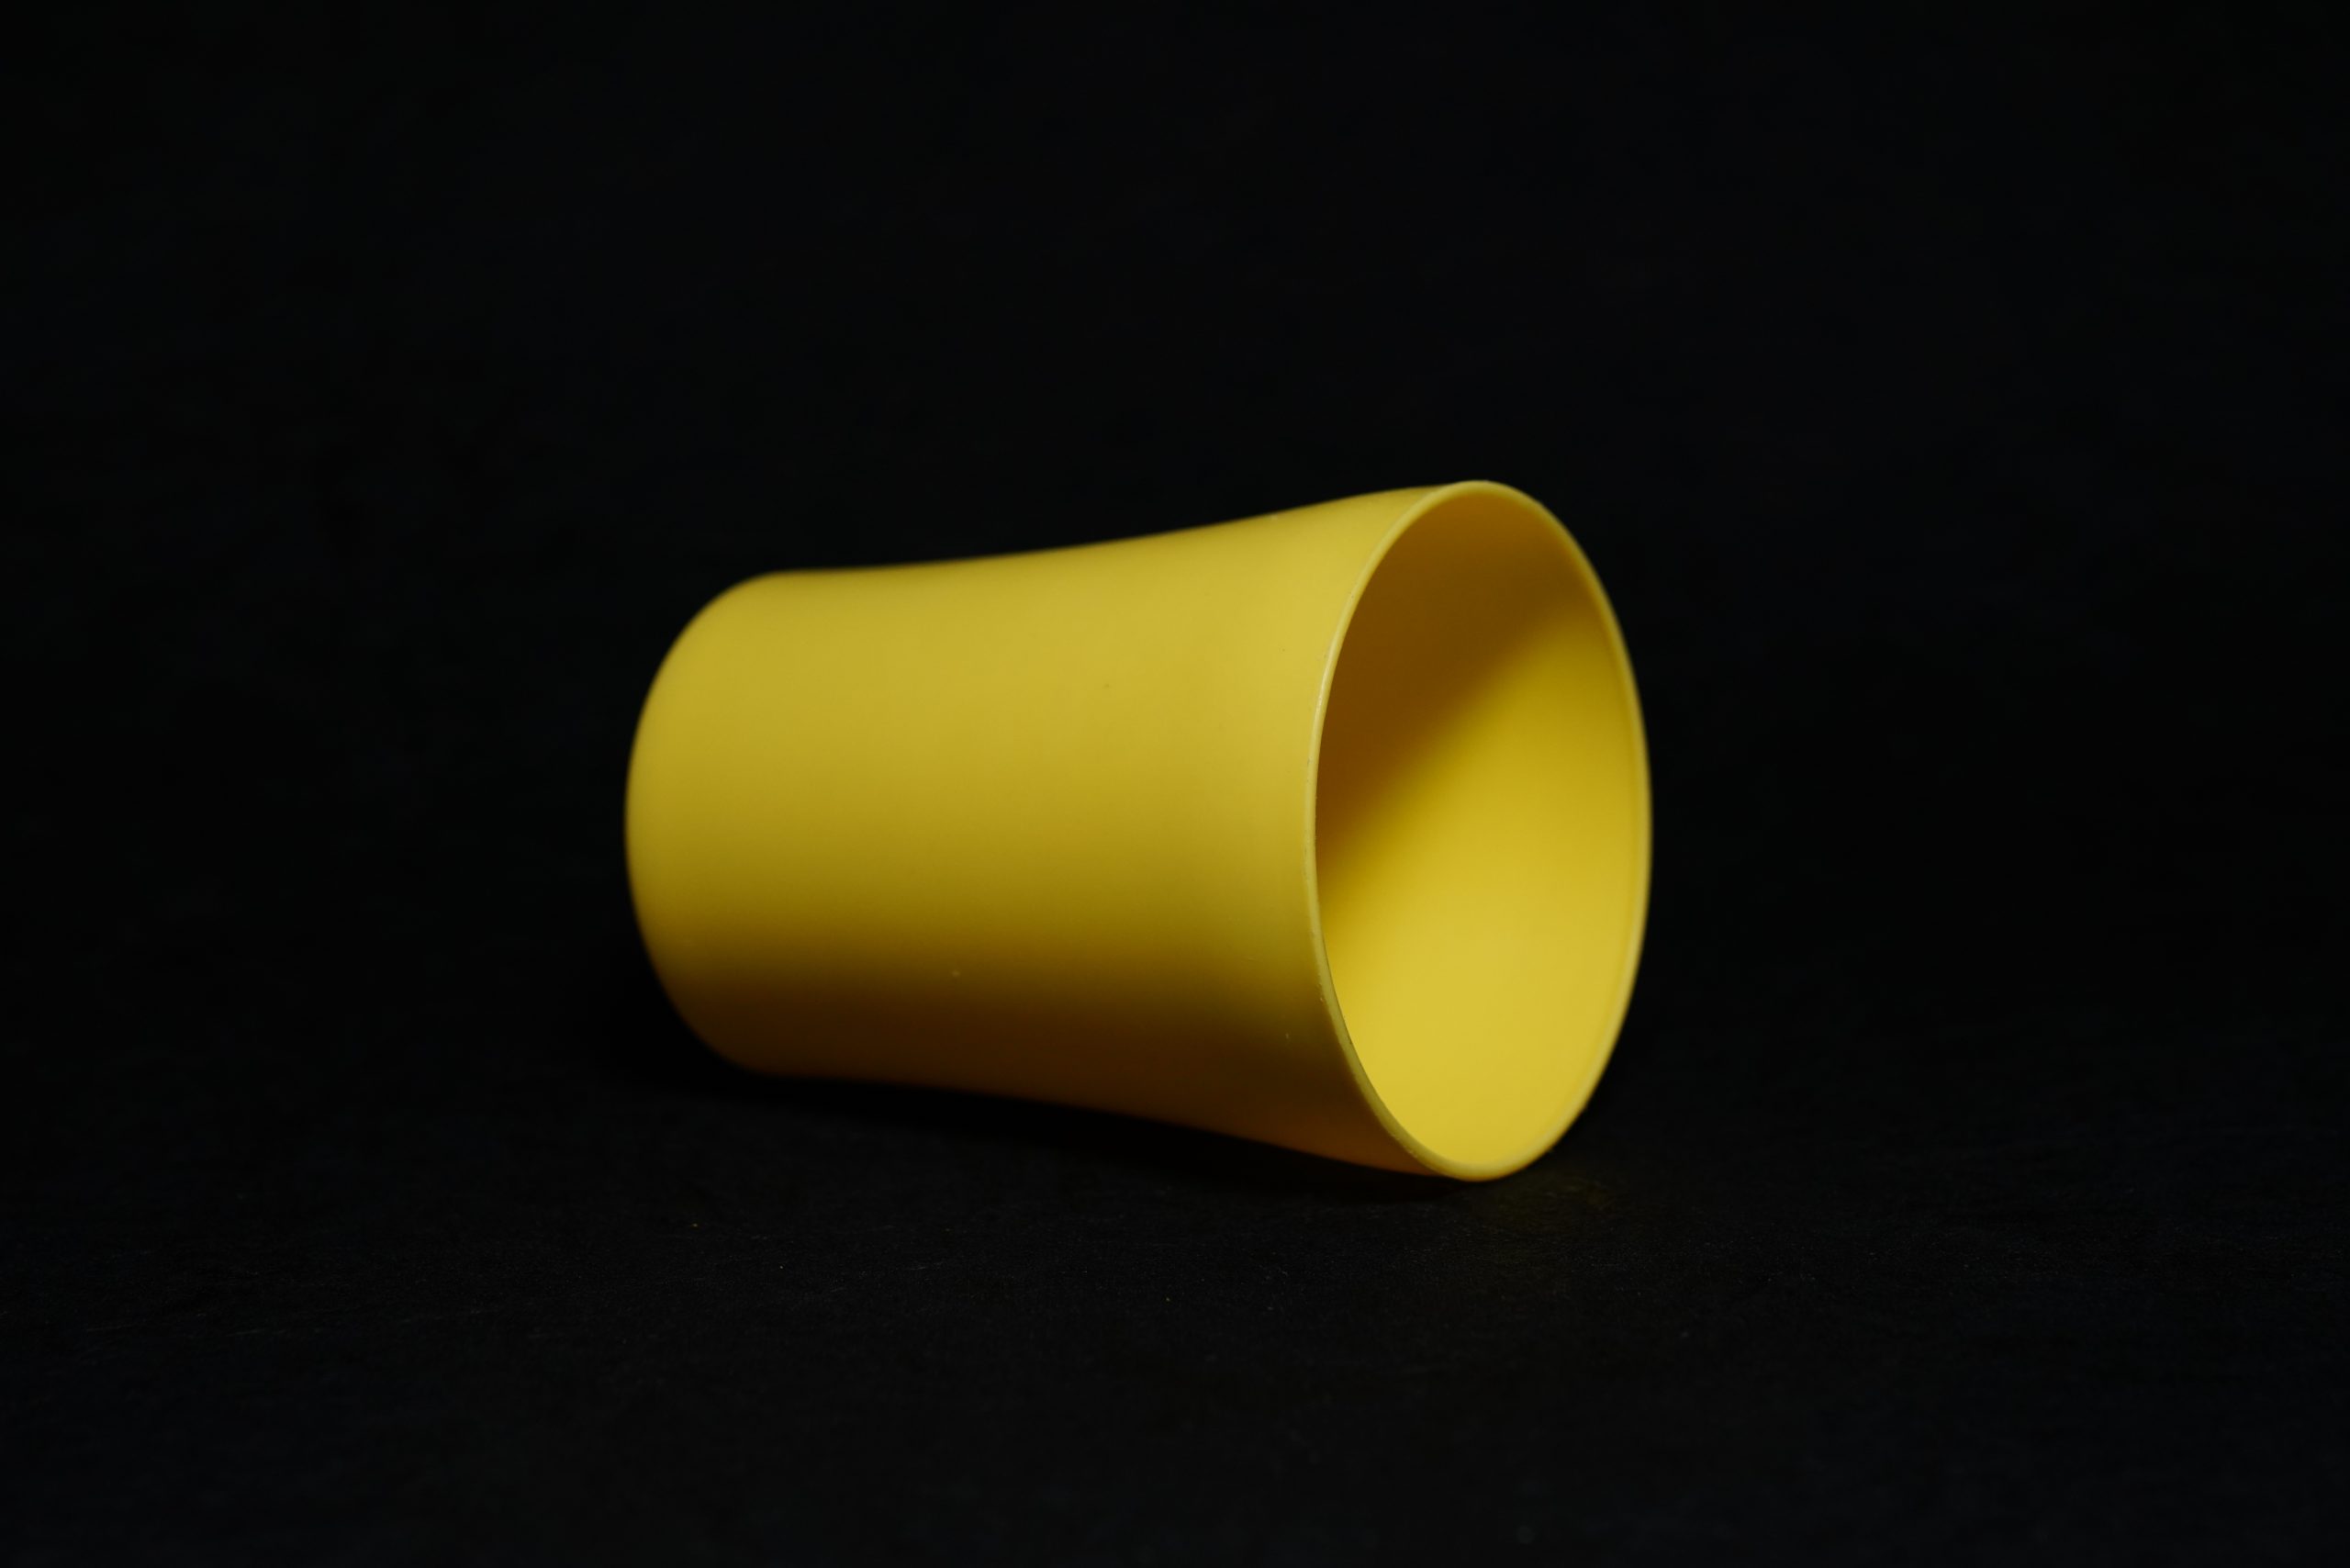 A yellow glass with black background